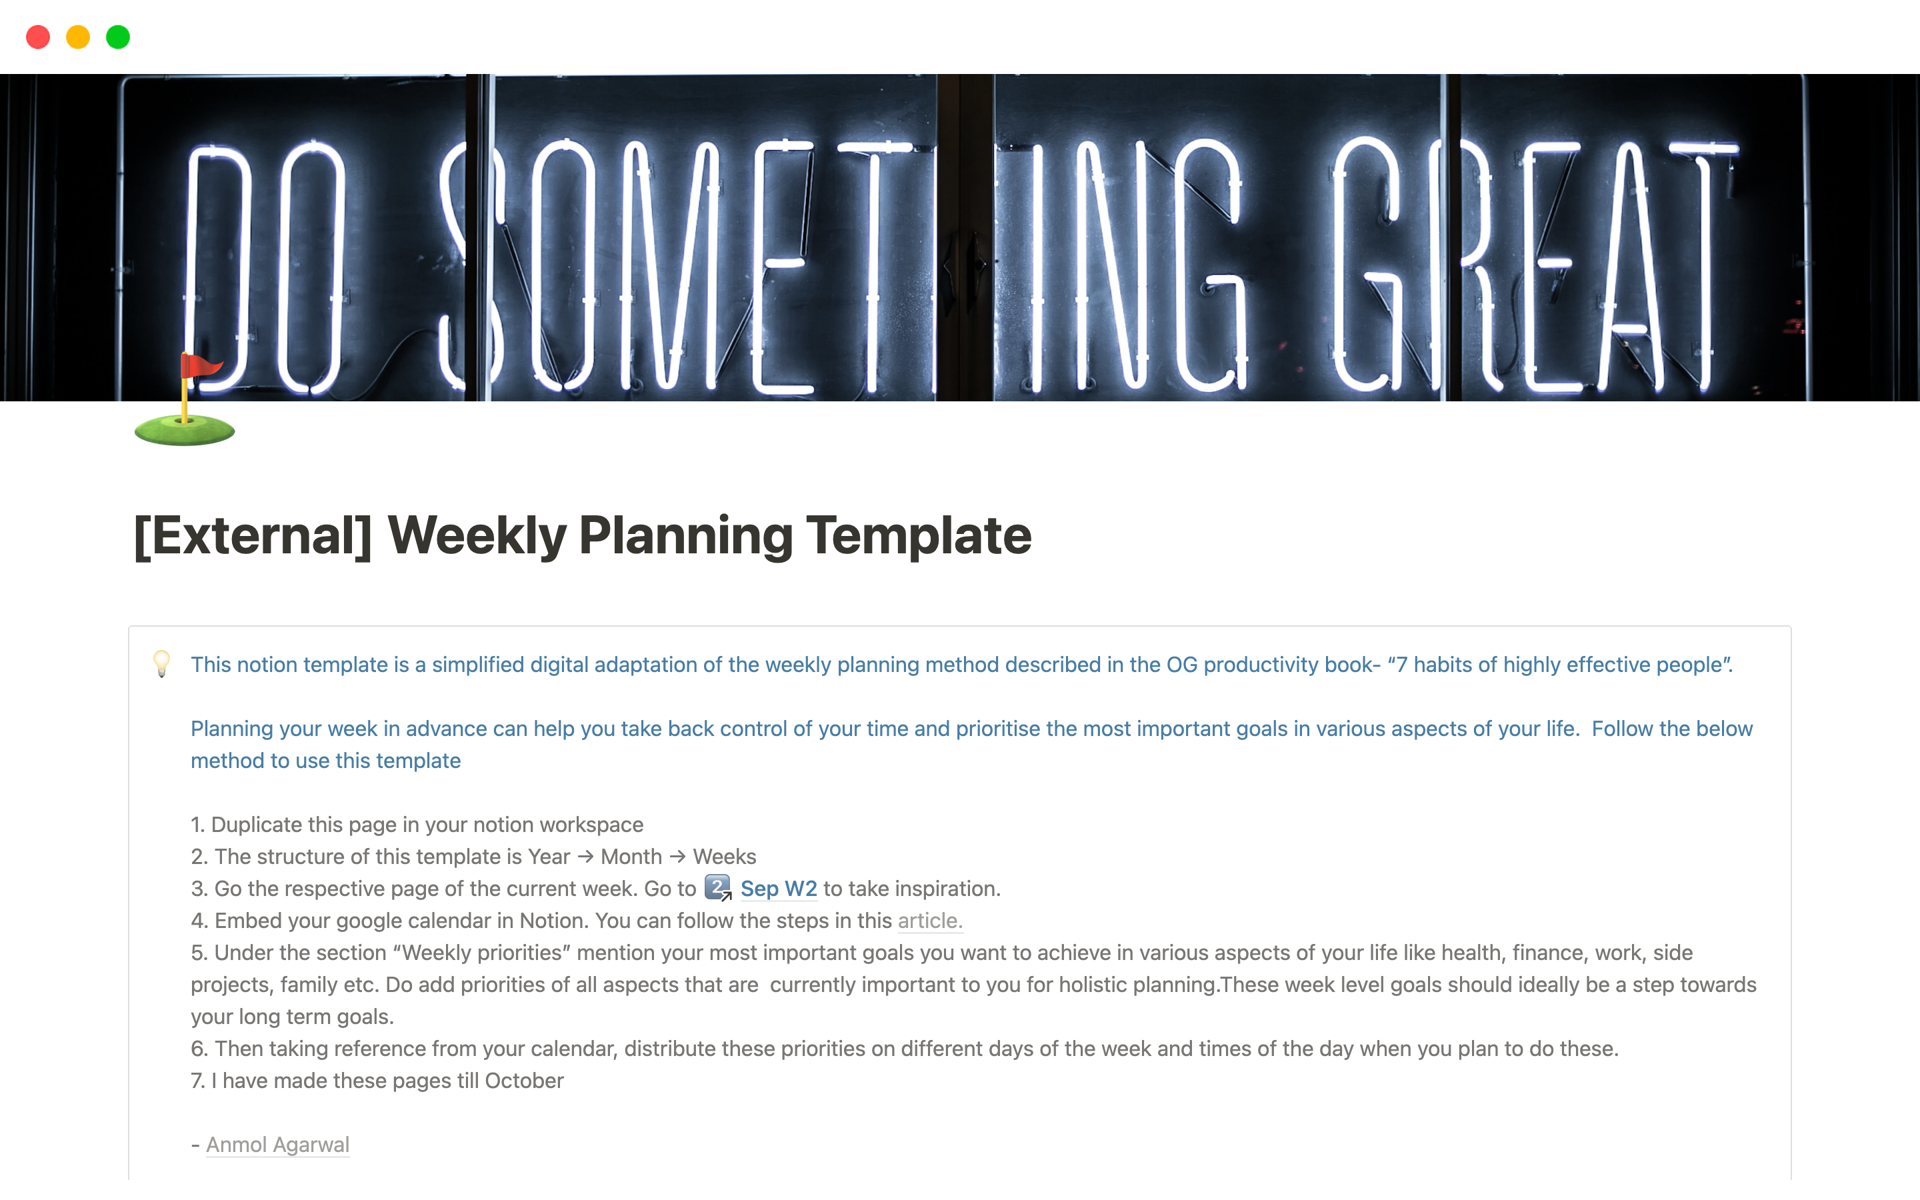 This notion template is a simplified digital adaptation of the weekly planning method described in the OG productivity book- “7 habits of highly effective people”. 